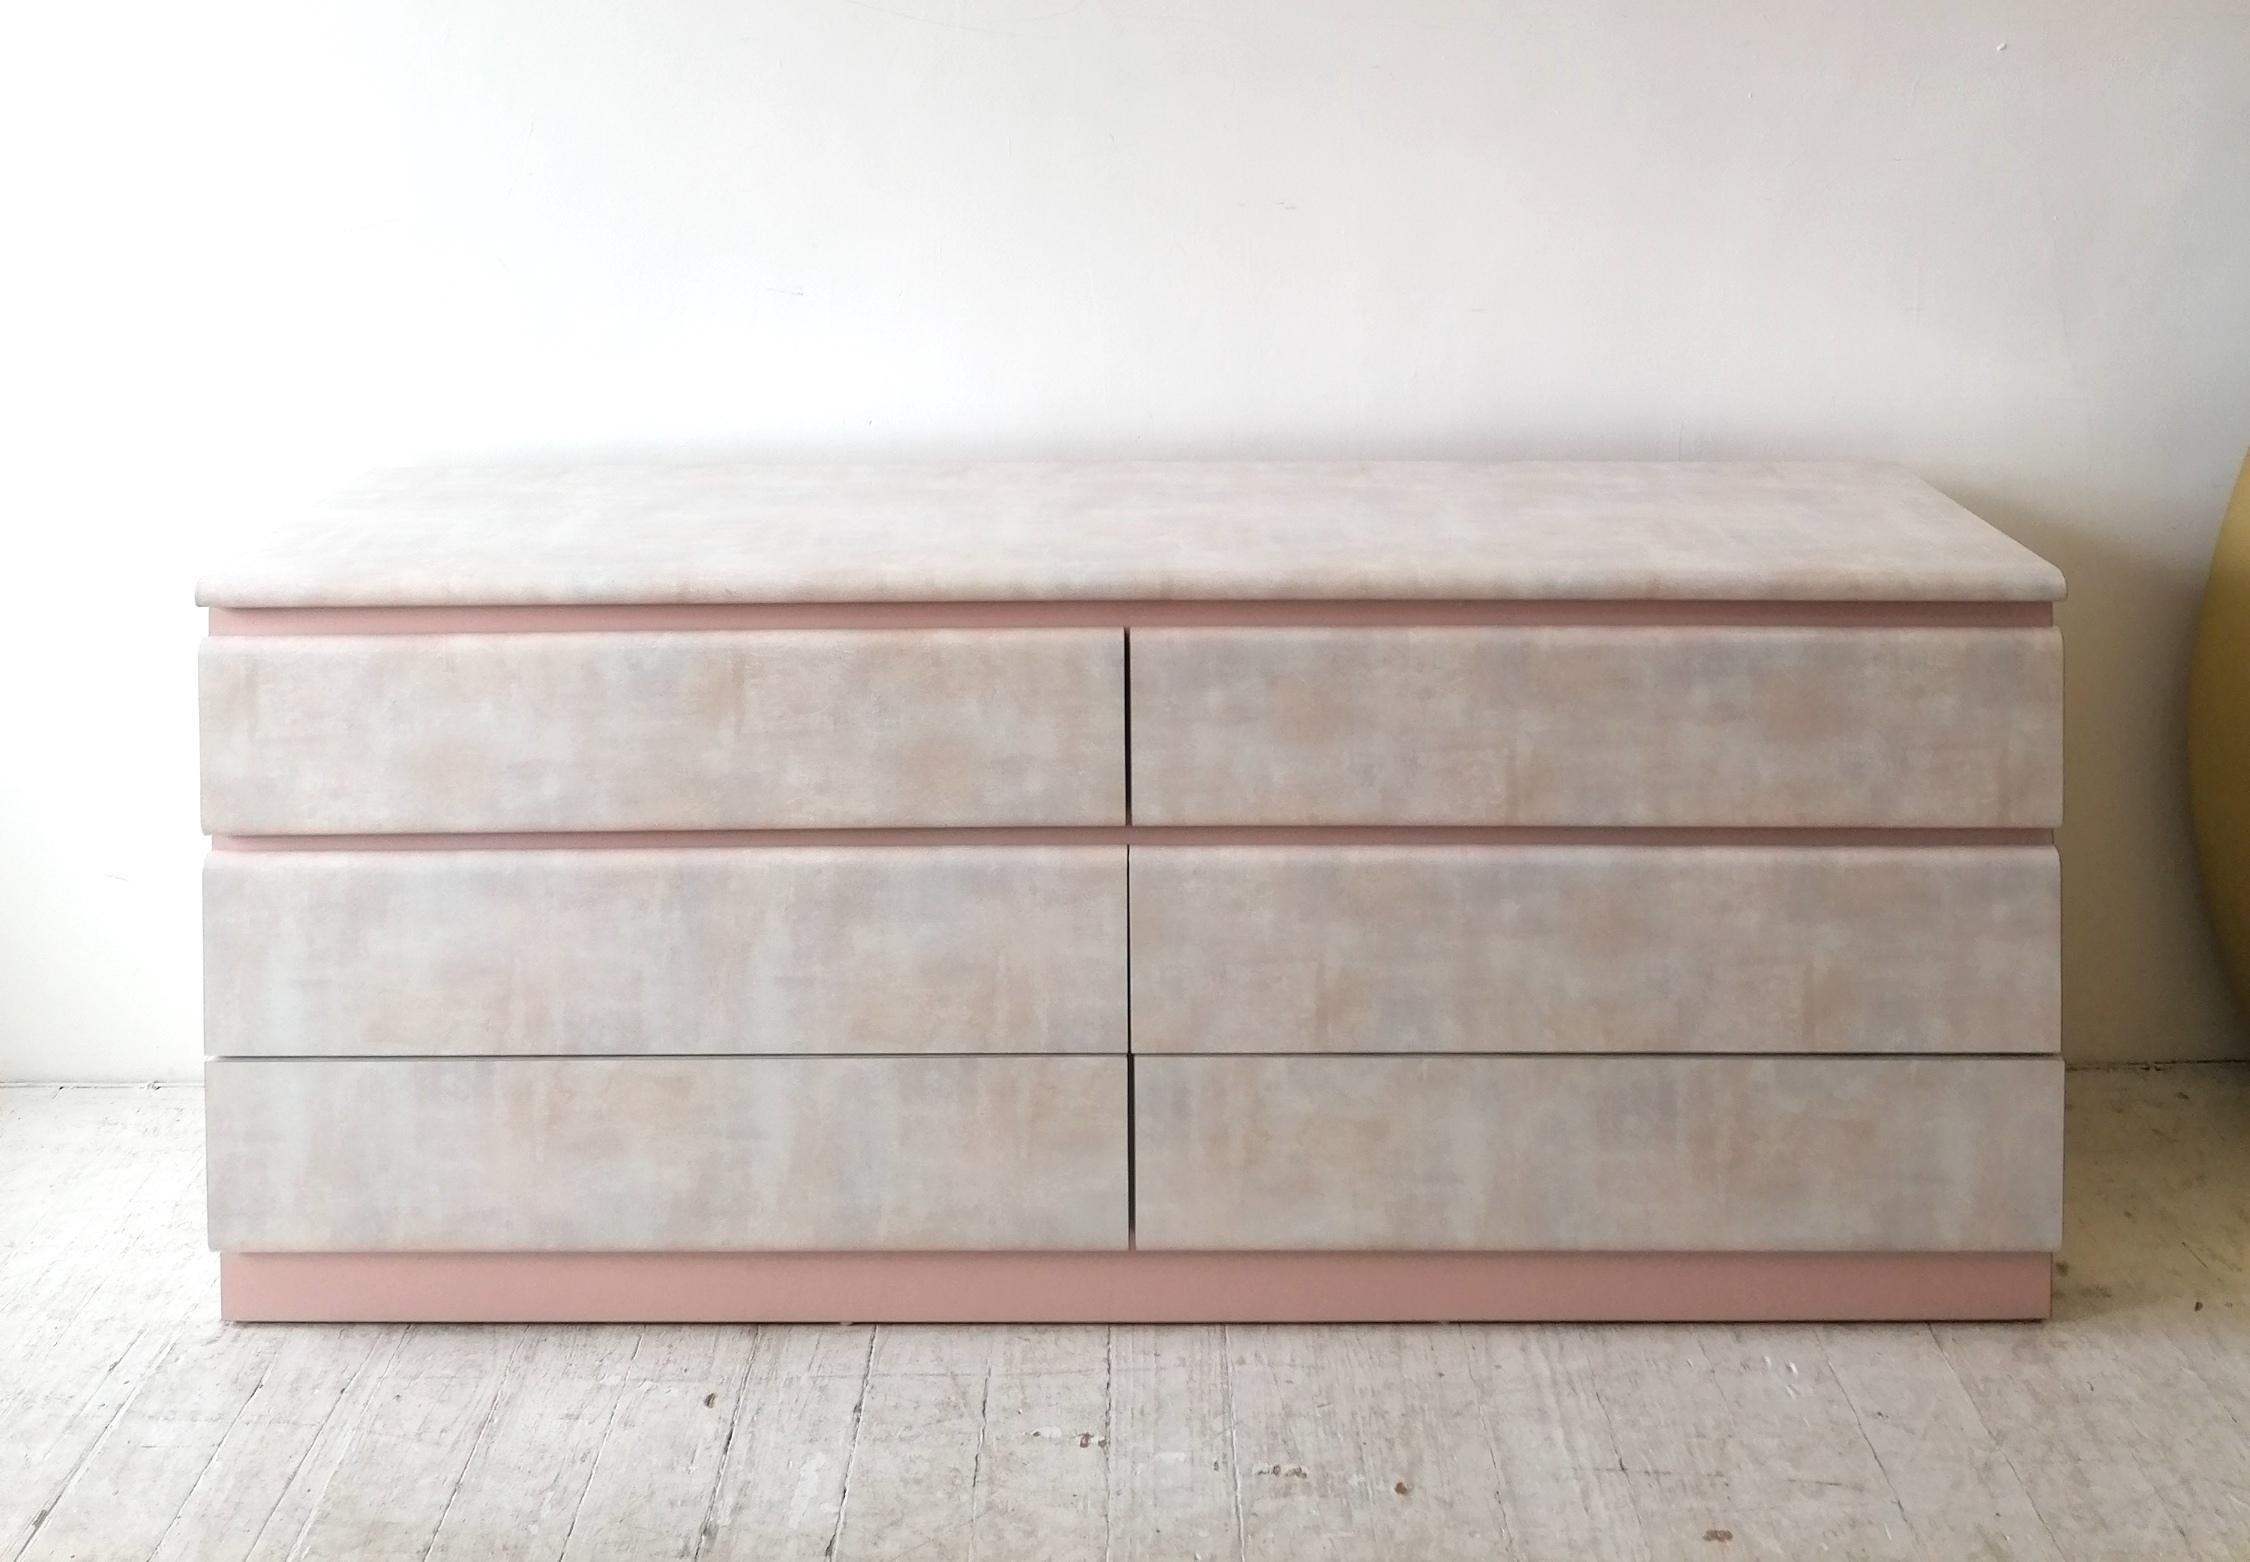 1980s American postmodern watercolour pastel & pink lacquer laminate sideboard with six large drawers. Really nice quality: Smoothly running wood-lined drawers. In great overall condition.

Dimensions : Width 174cm, depth 48cm, height 74cm.